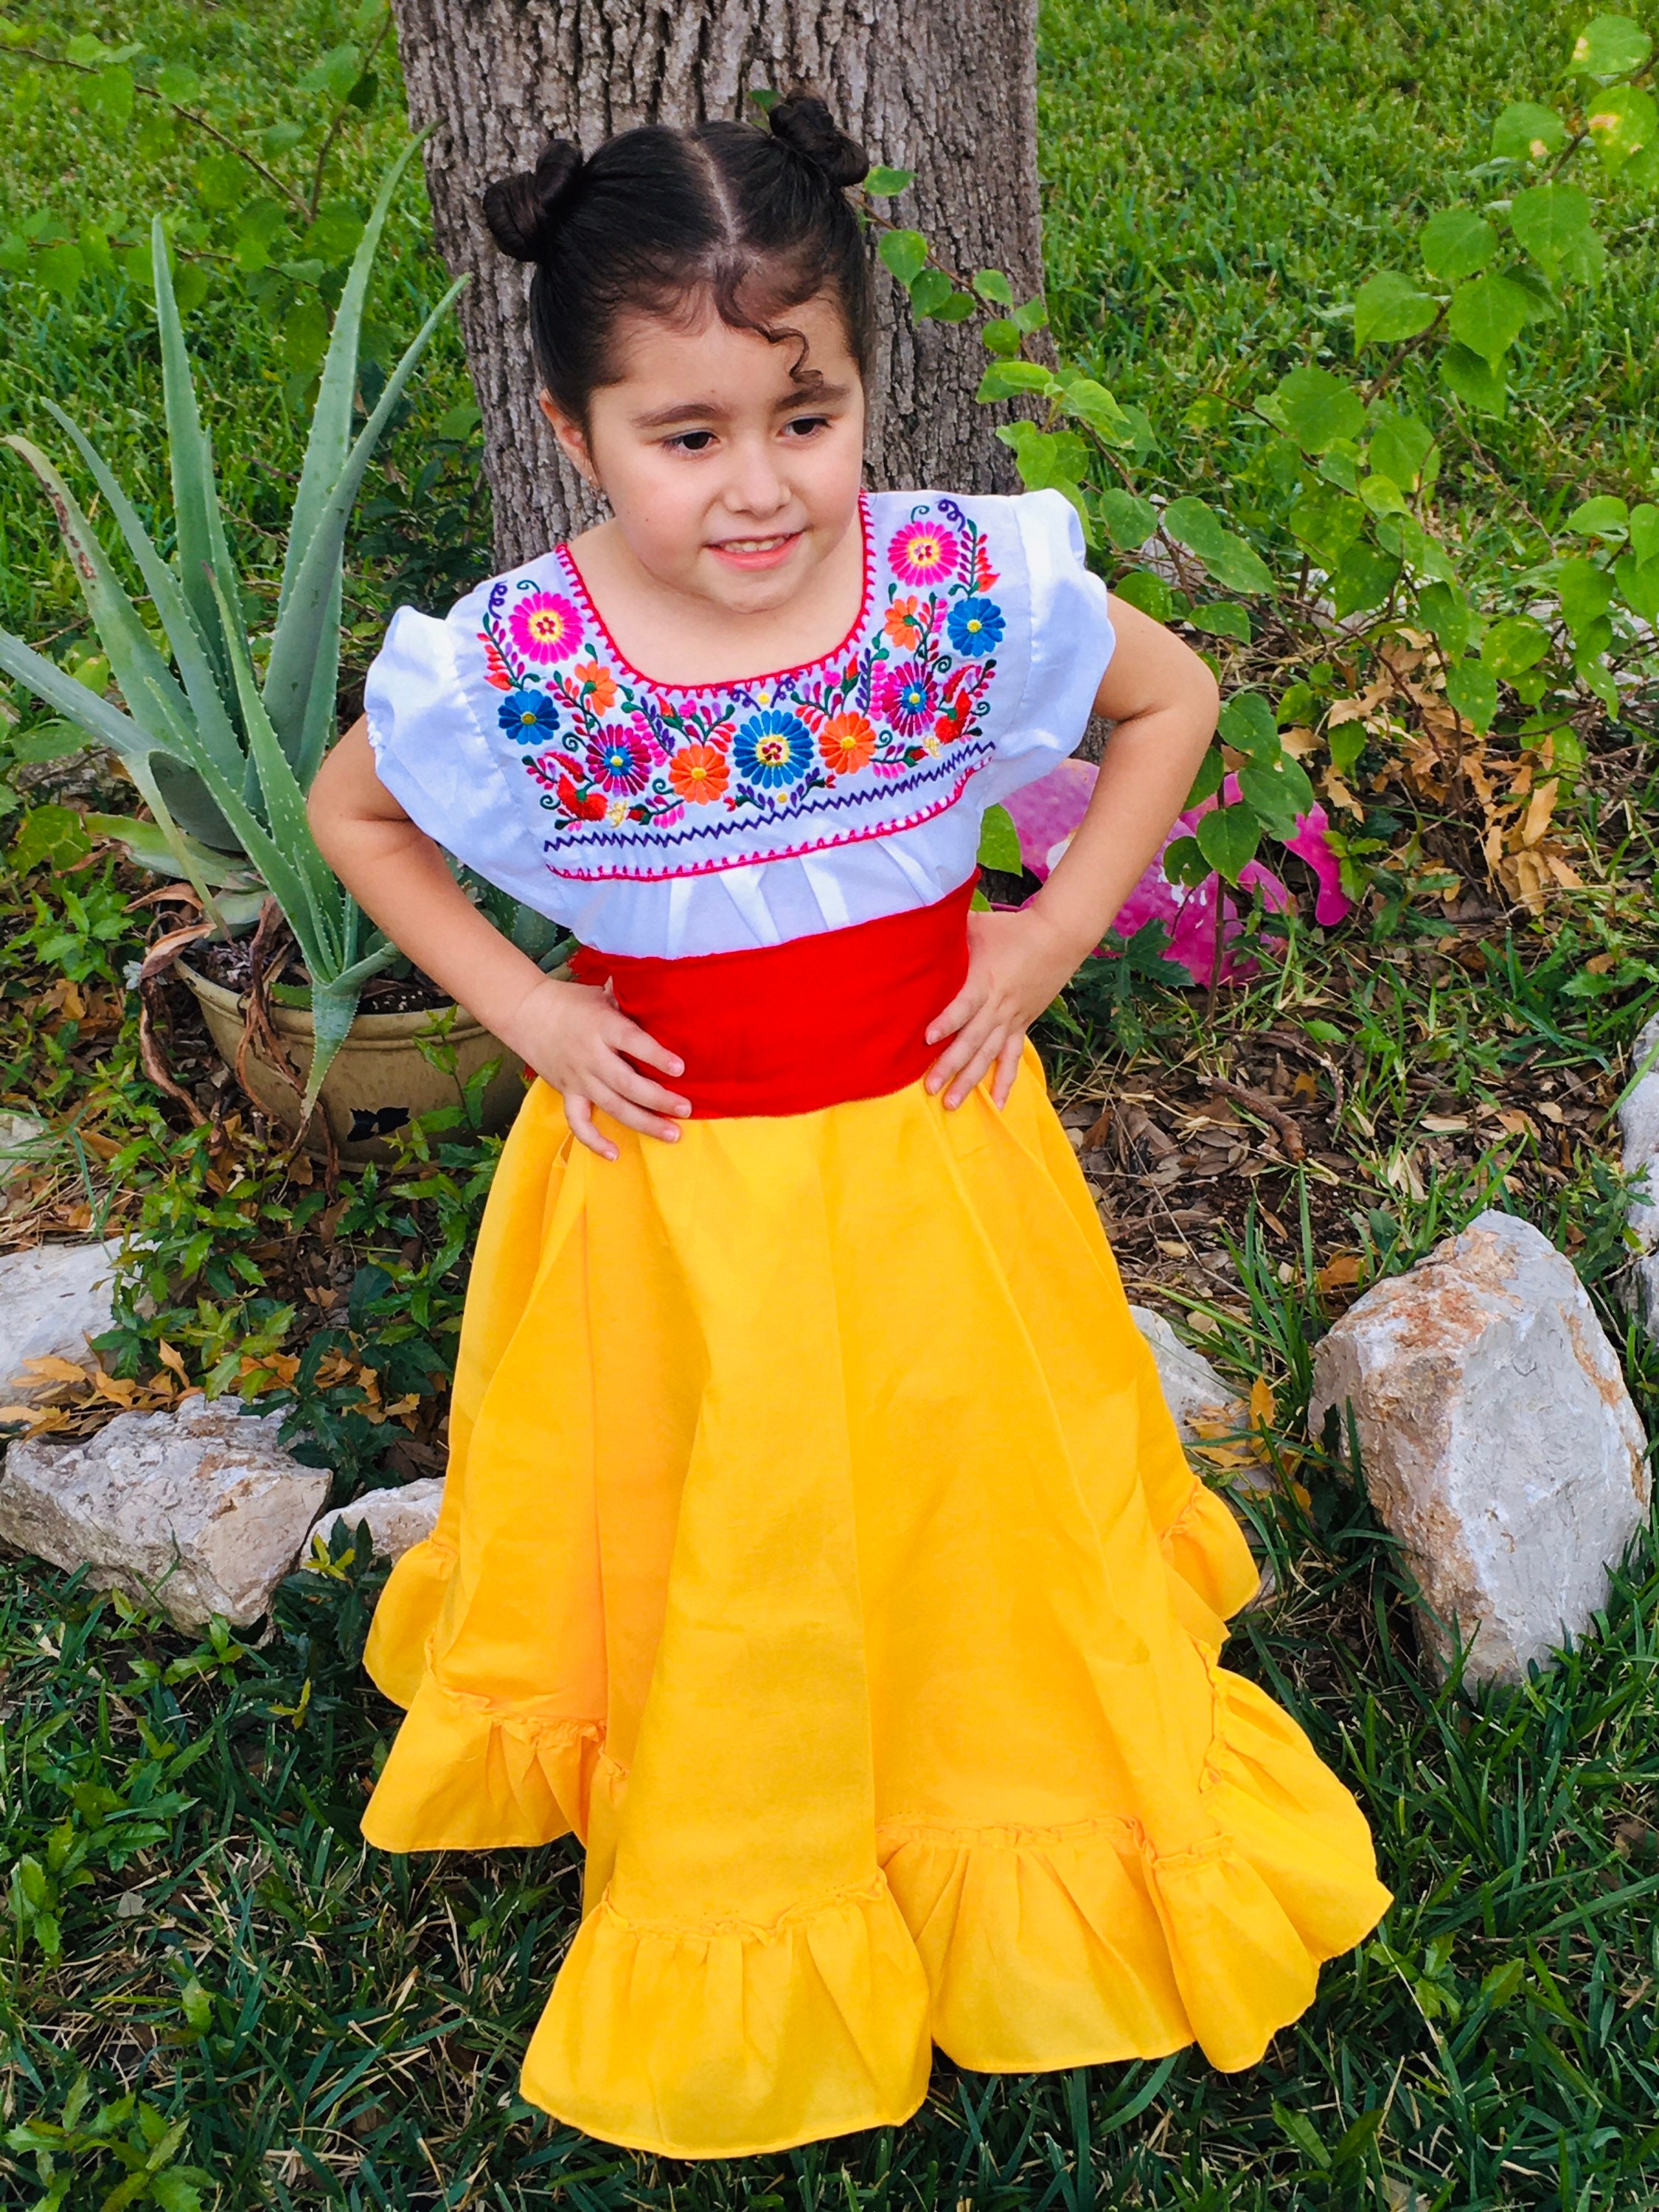 Fiesta Mexicana Outfit - Etsy